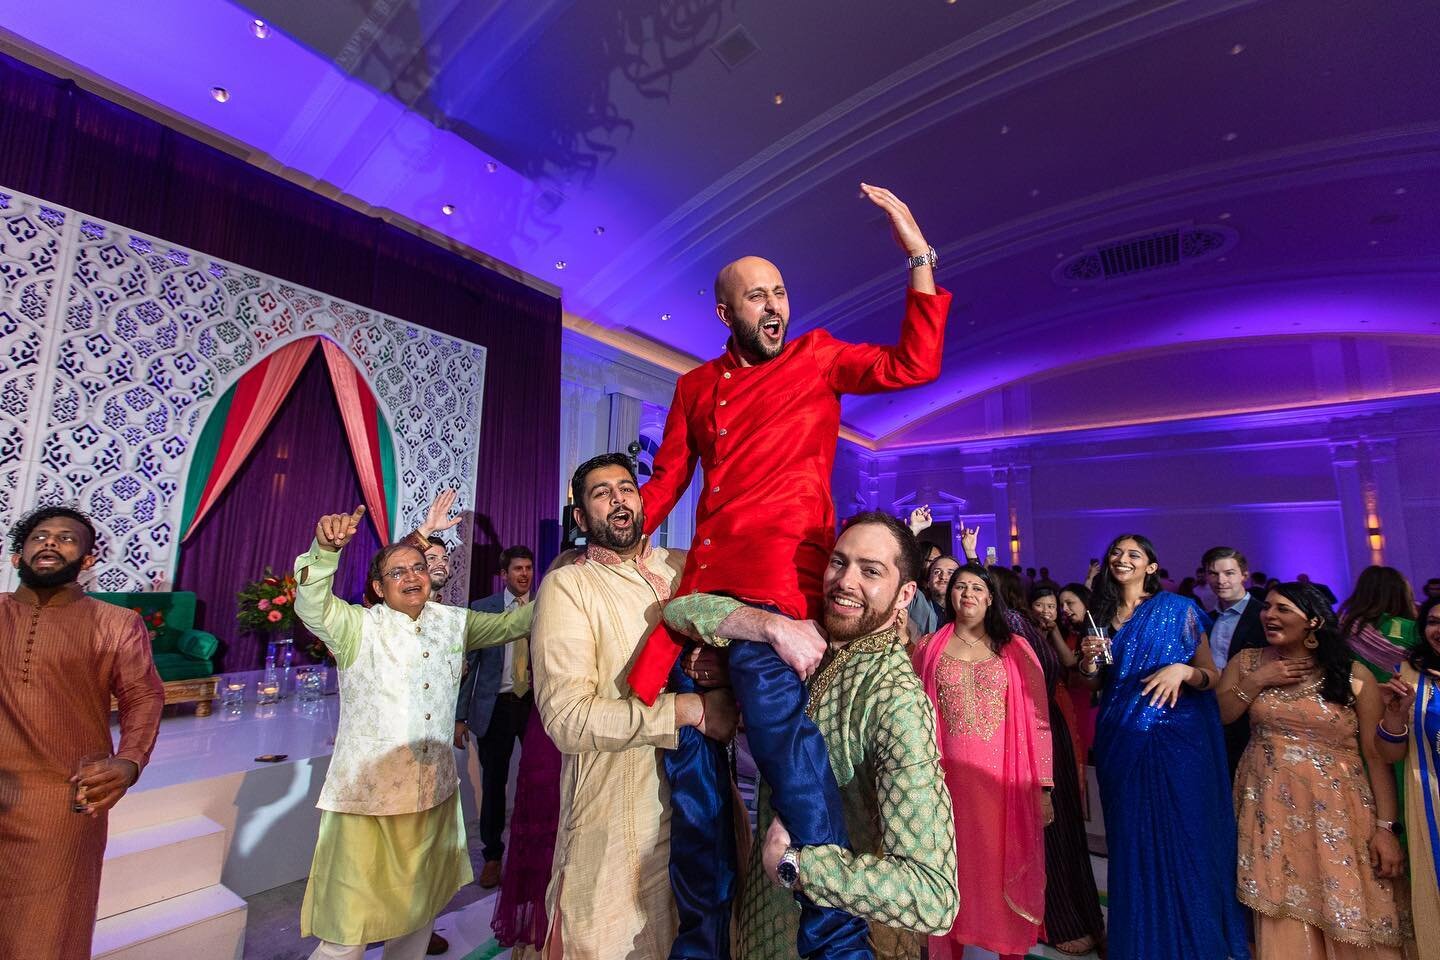 Henna &amp; Nikhil&rsquo;s super energetic &amp; colorful Sangeet night 💃🏽The last picture is what you&rsquo;re here for ➡️😂

.
.
.
📷: @nayeem_vohra 
📝: @eventricsw 
🌸: @suhaaggarden 
🎧: @sangeensingh 
🏨: @vinoywed 
👰&zwj;♀️: @henna.sonali 
